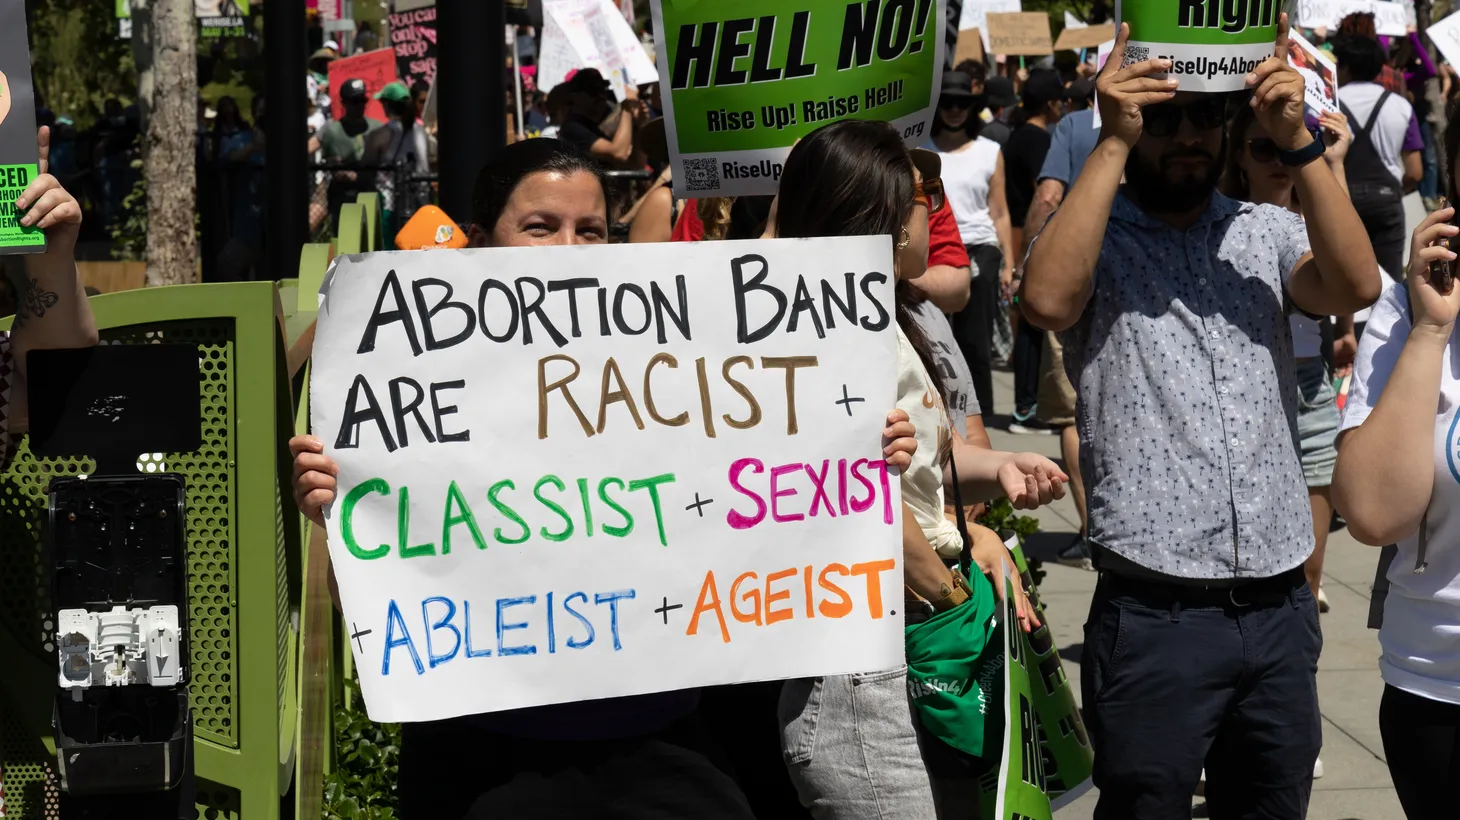 An activist at an abortion rights rally holds a sign saying, "Abortion bans are racist + classist + sexist + ableist + ageist," Los Angeles, CA, May 14, 2022.